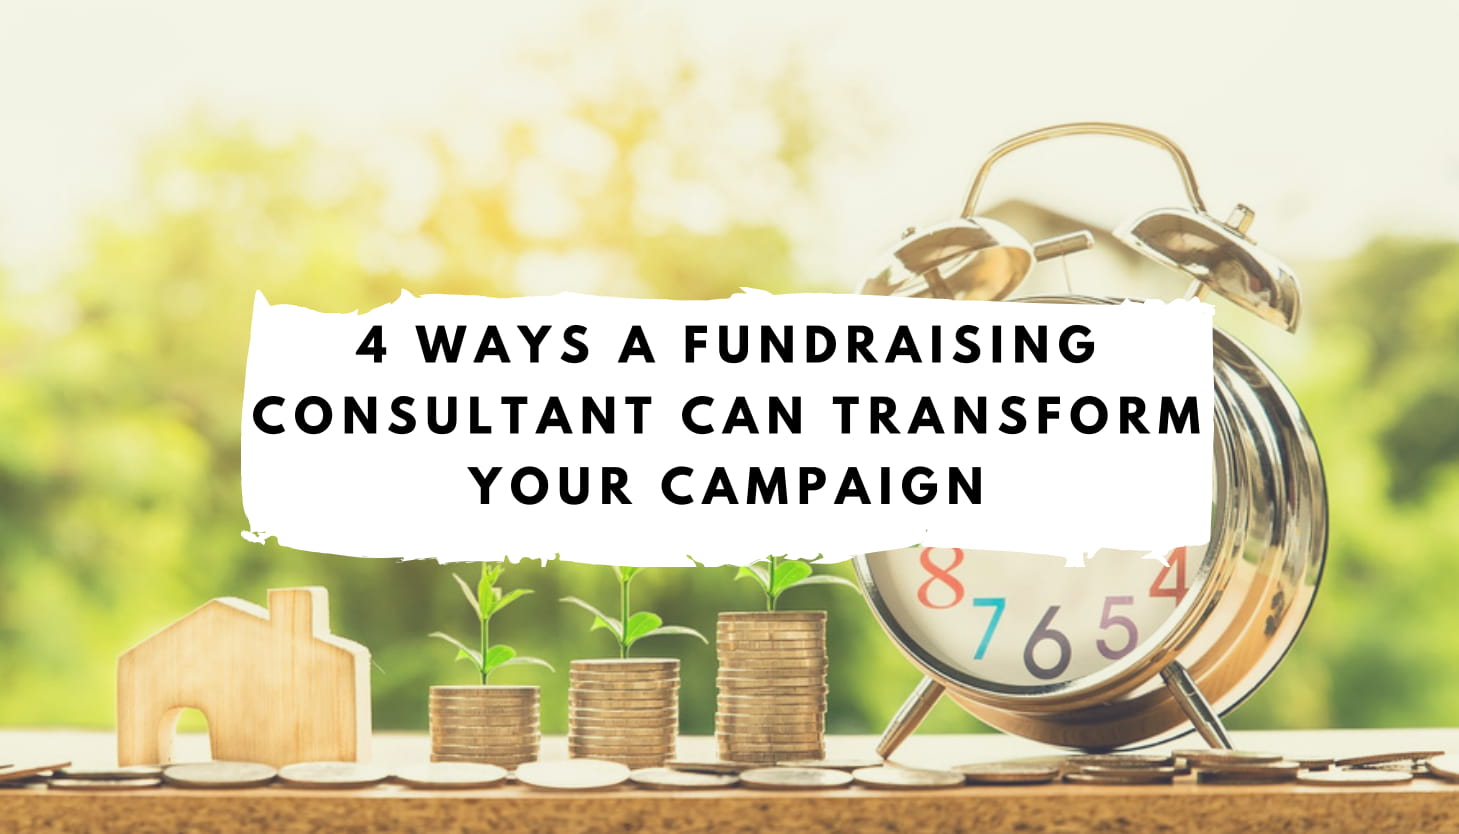 4 Ways a Fundraising Consultant Can Transform Your Campaign